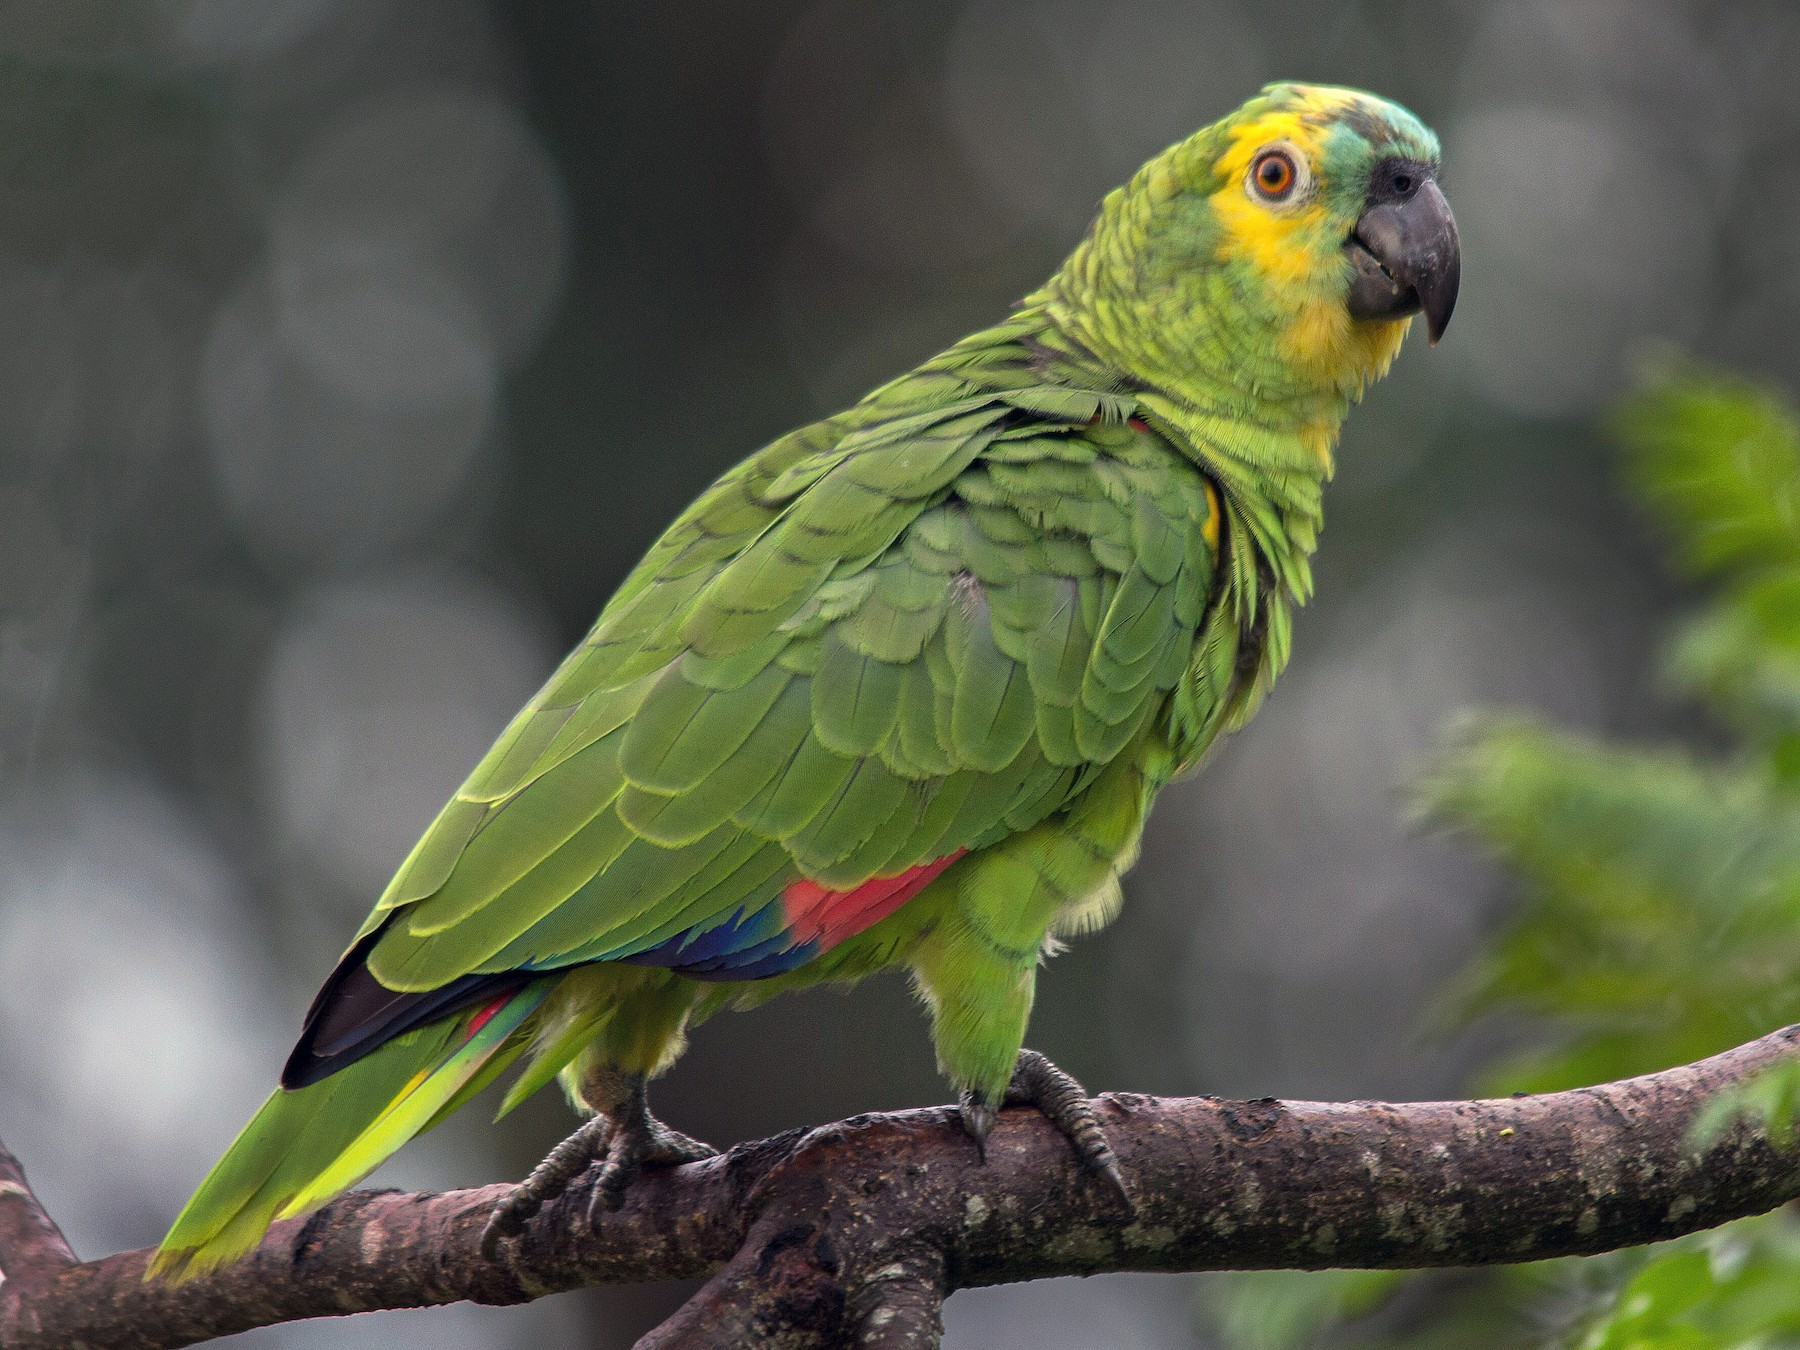 Turquoise-fronted Parrot - João Vitor Perin Andriola